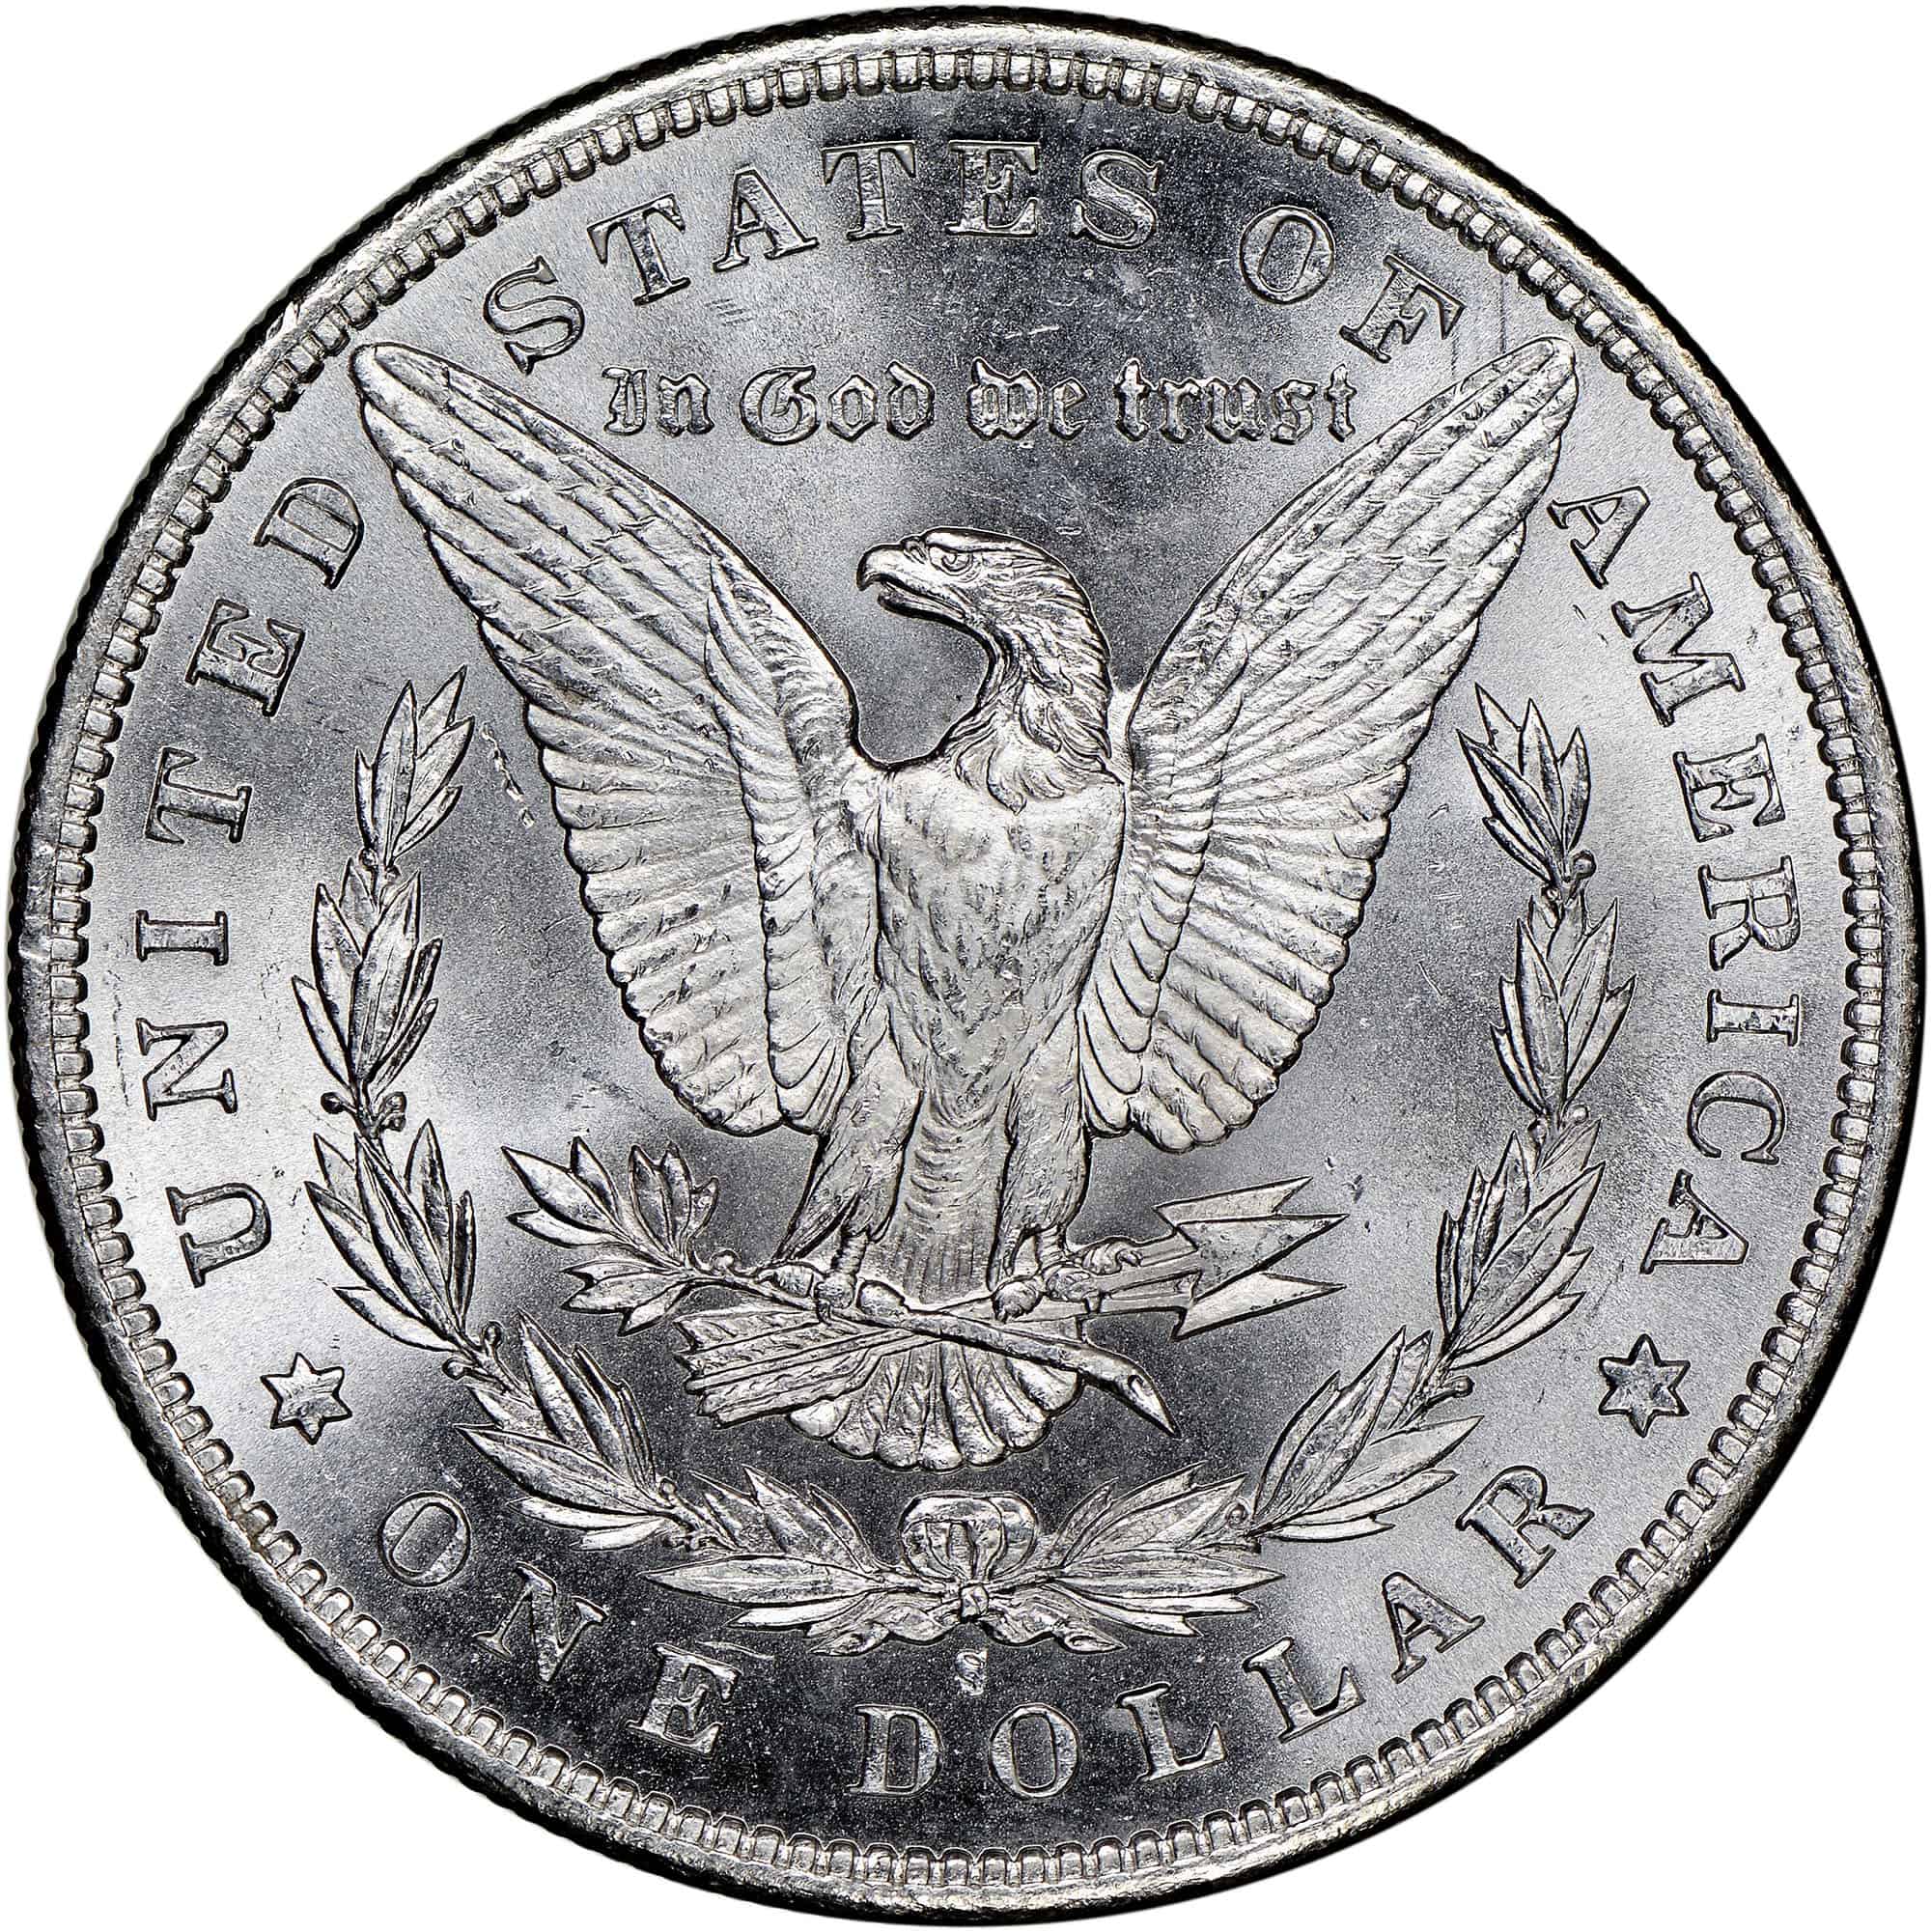 1898 Silver Dollar Value for “S” Mint Mark